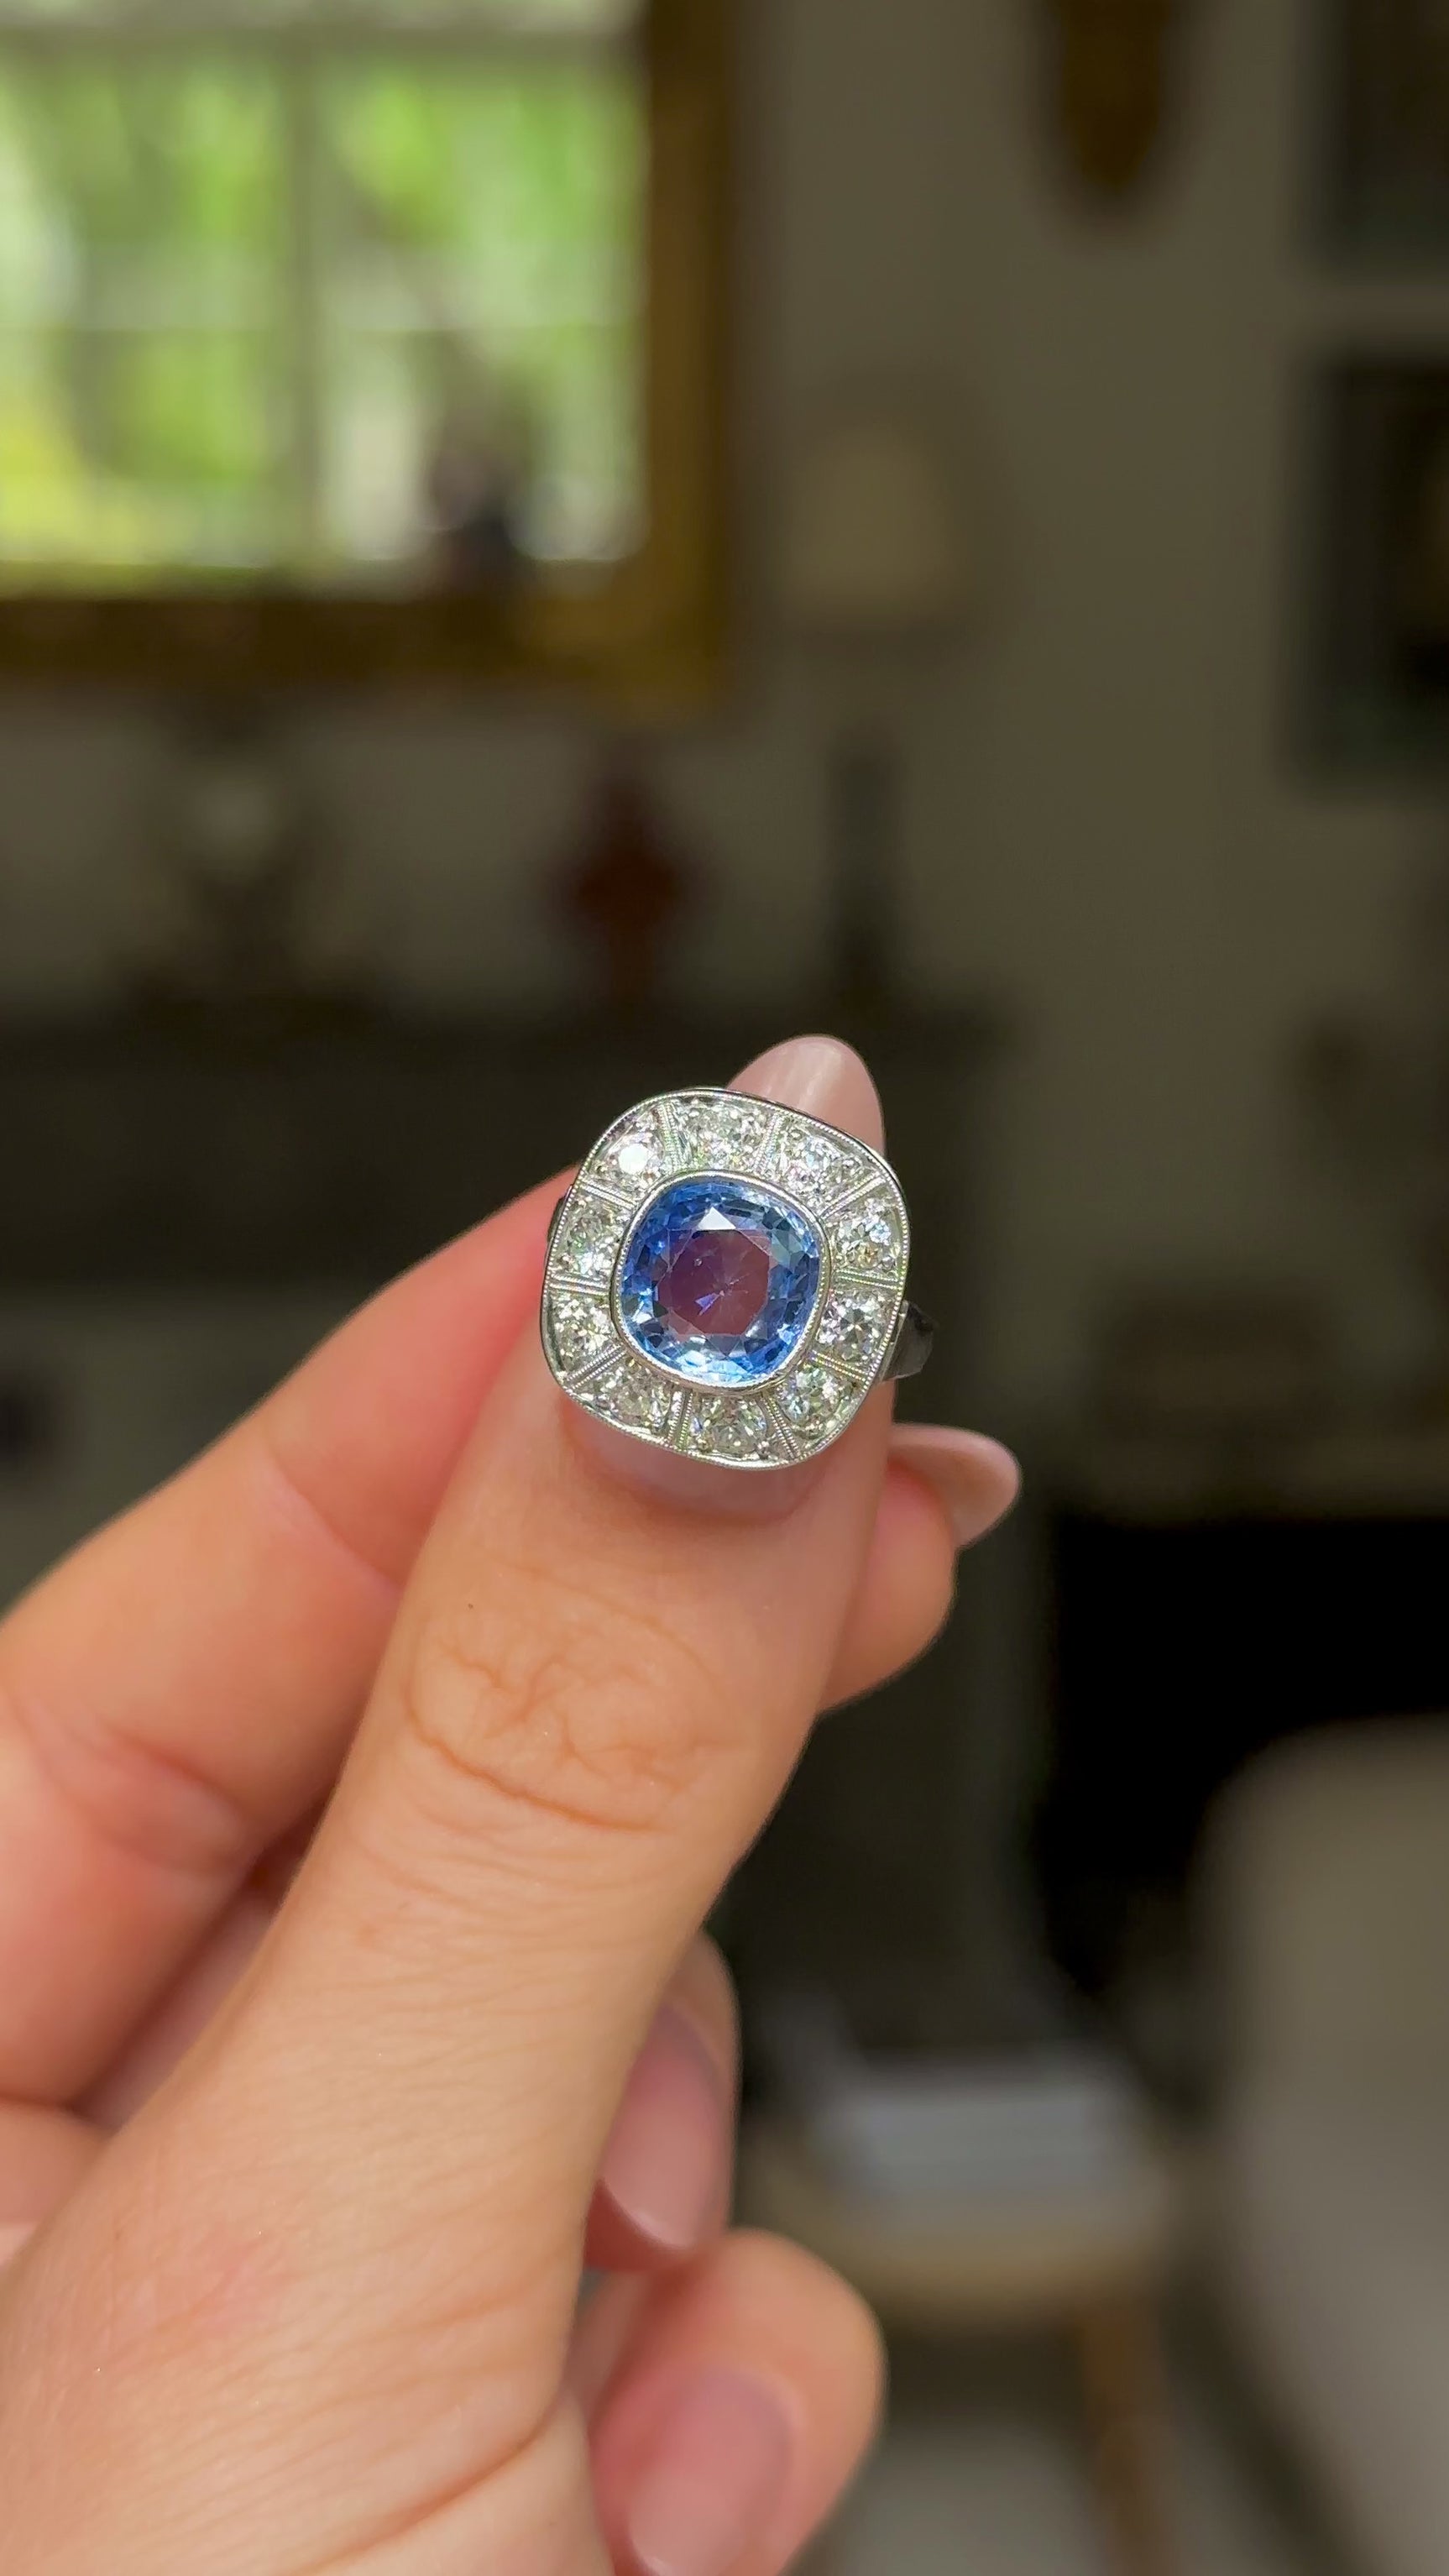 Art Deco, ceylon cushion-cut sapphire and diamond cluster ring, held in fingers and rotated to give perspective.